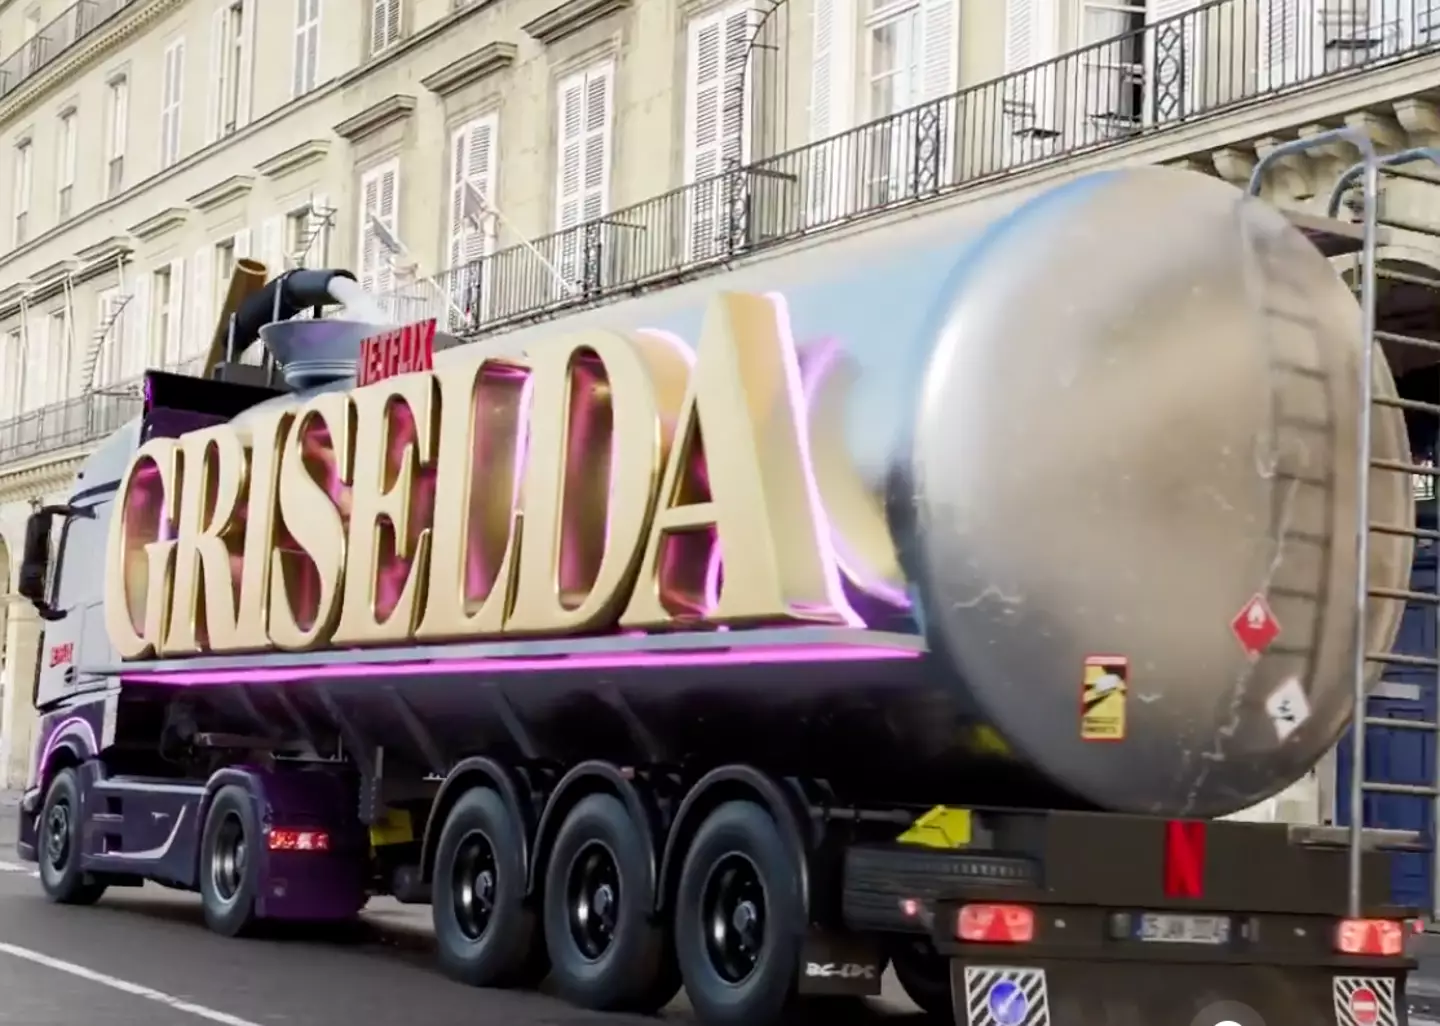 The lorry had the name of the show plastered across the side in this odd stunt.